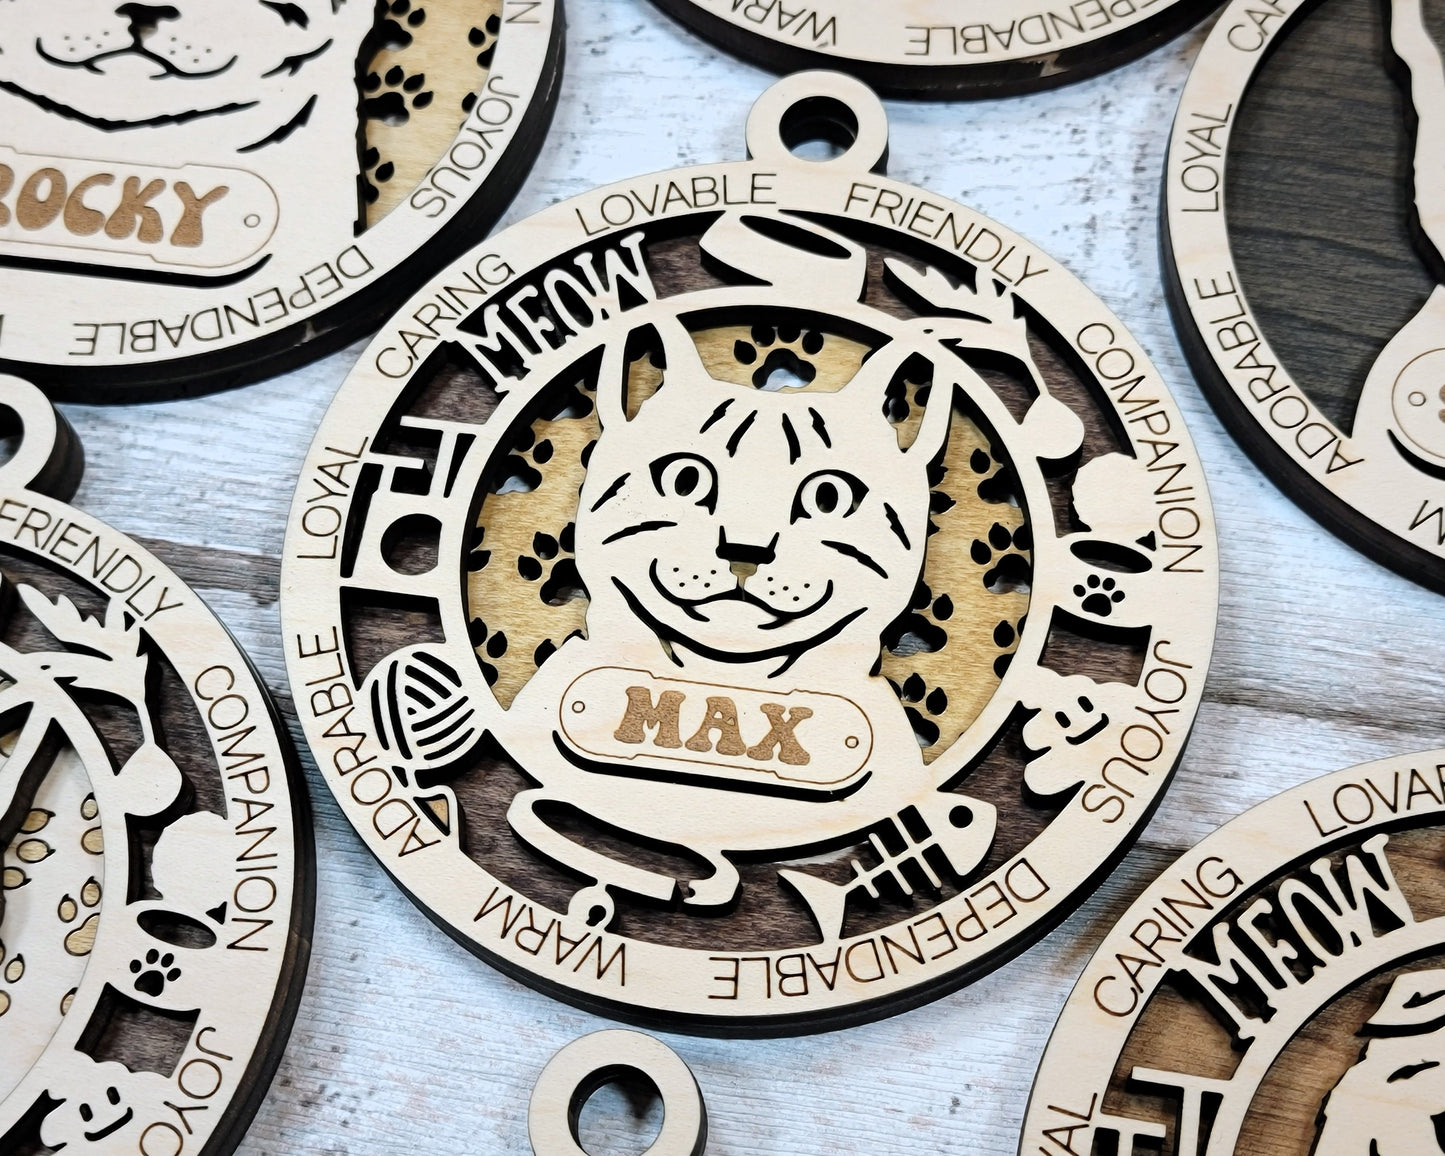 Adorable Cat Ornaments - 25 Breeds included with 2 Versions - 50 Ornaments - SVG, PDF, AI File Download - Sized for Glowforge